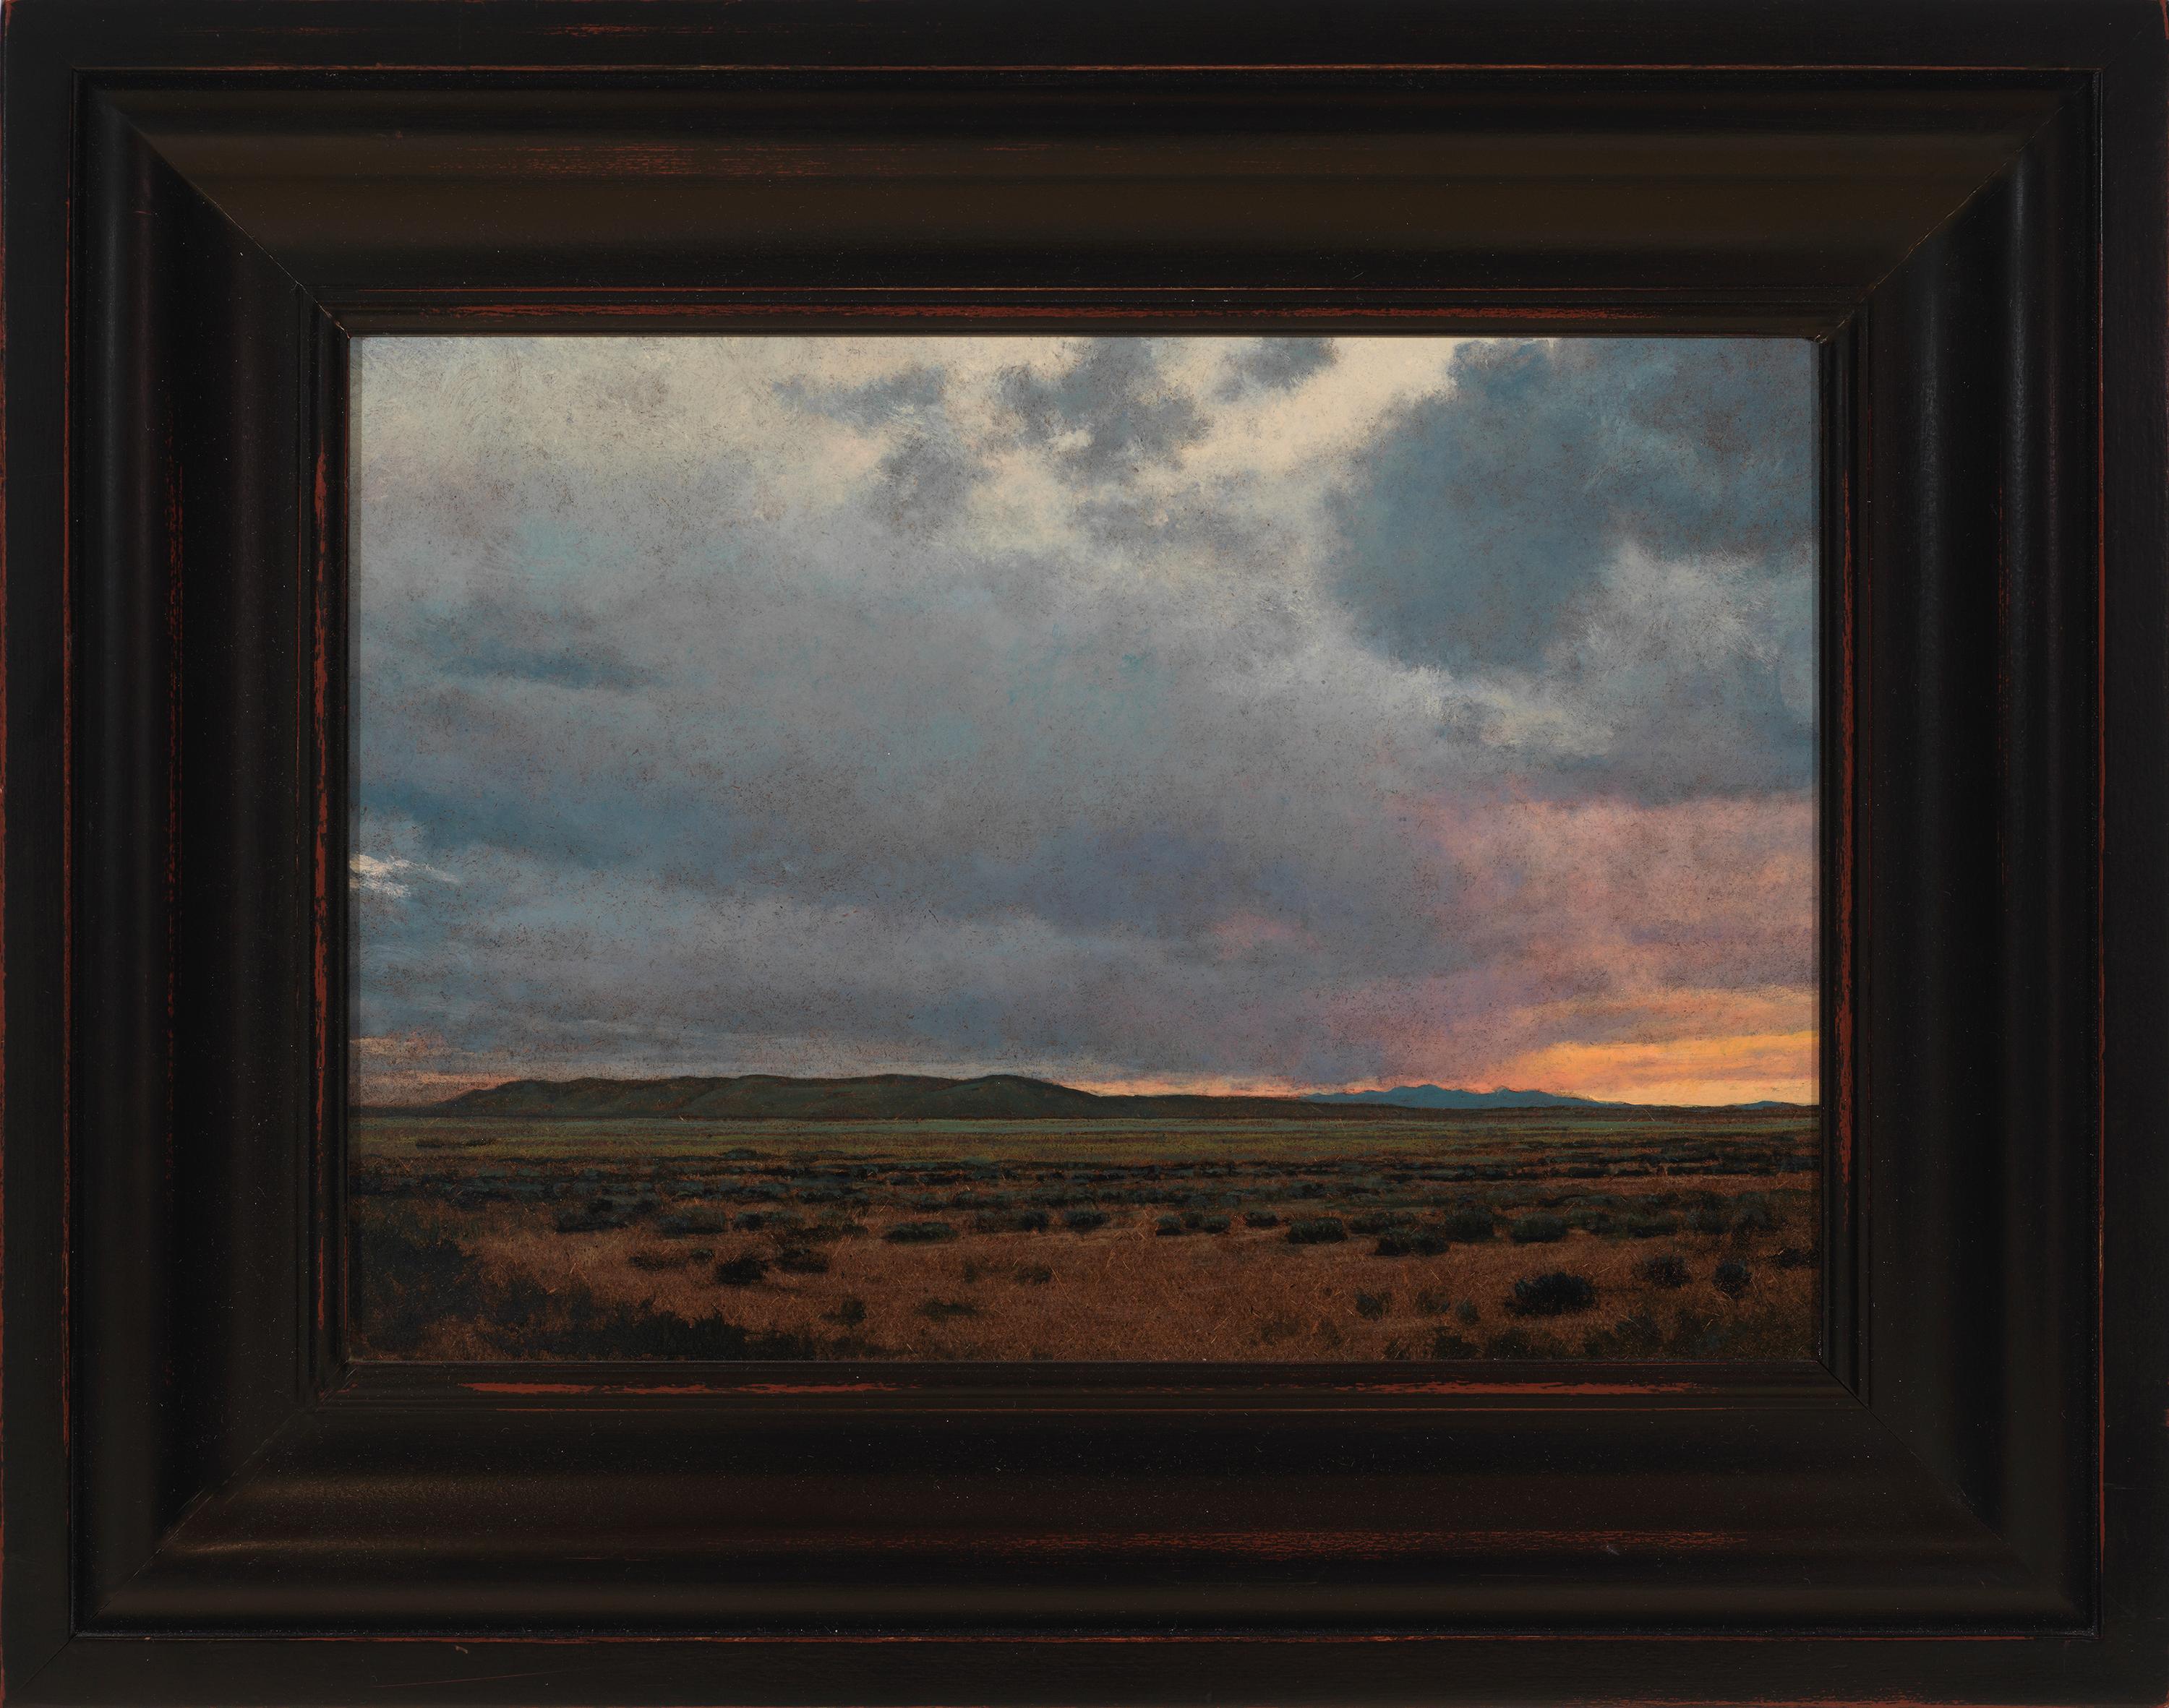 Sunset South of Galisteo, NM - Small Scale Landscape Painting, Oil on Panel 1